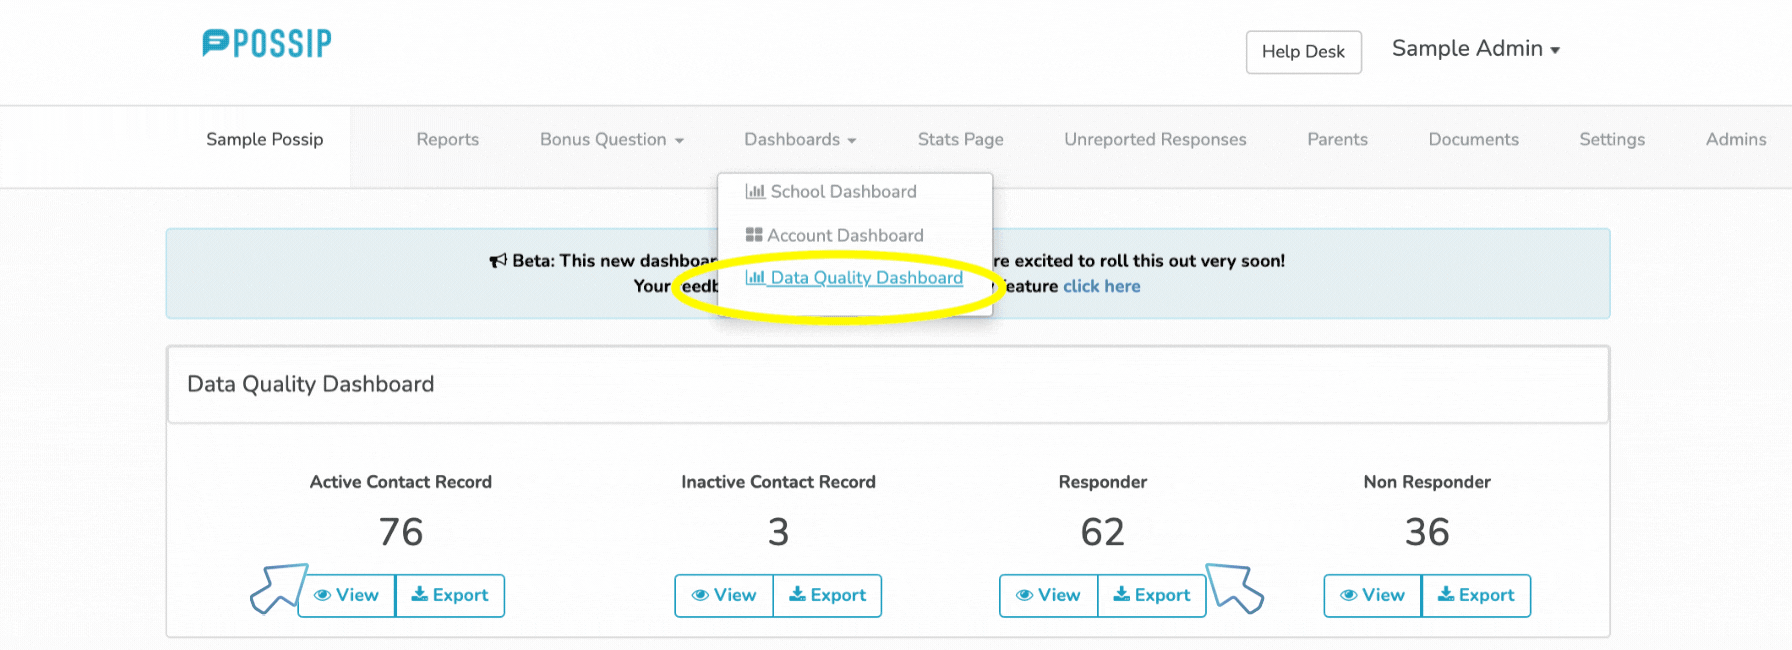 The data quality dashboard with the dashboard drop down circle and arrows pointed to "Active Contact Record" and "Responder."